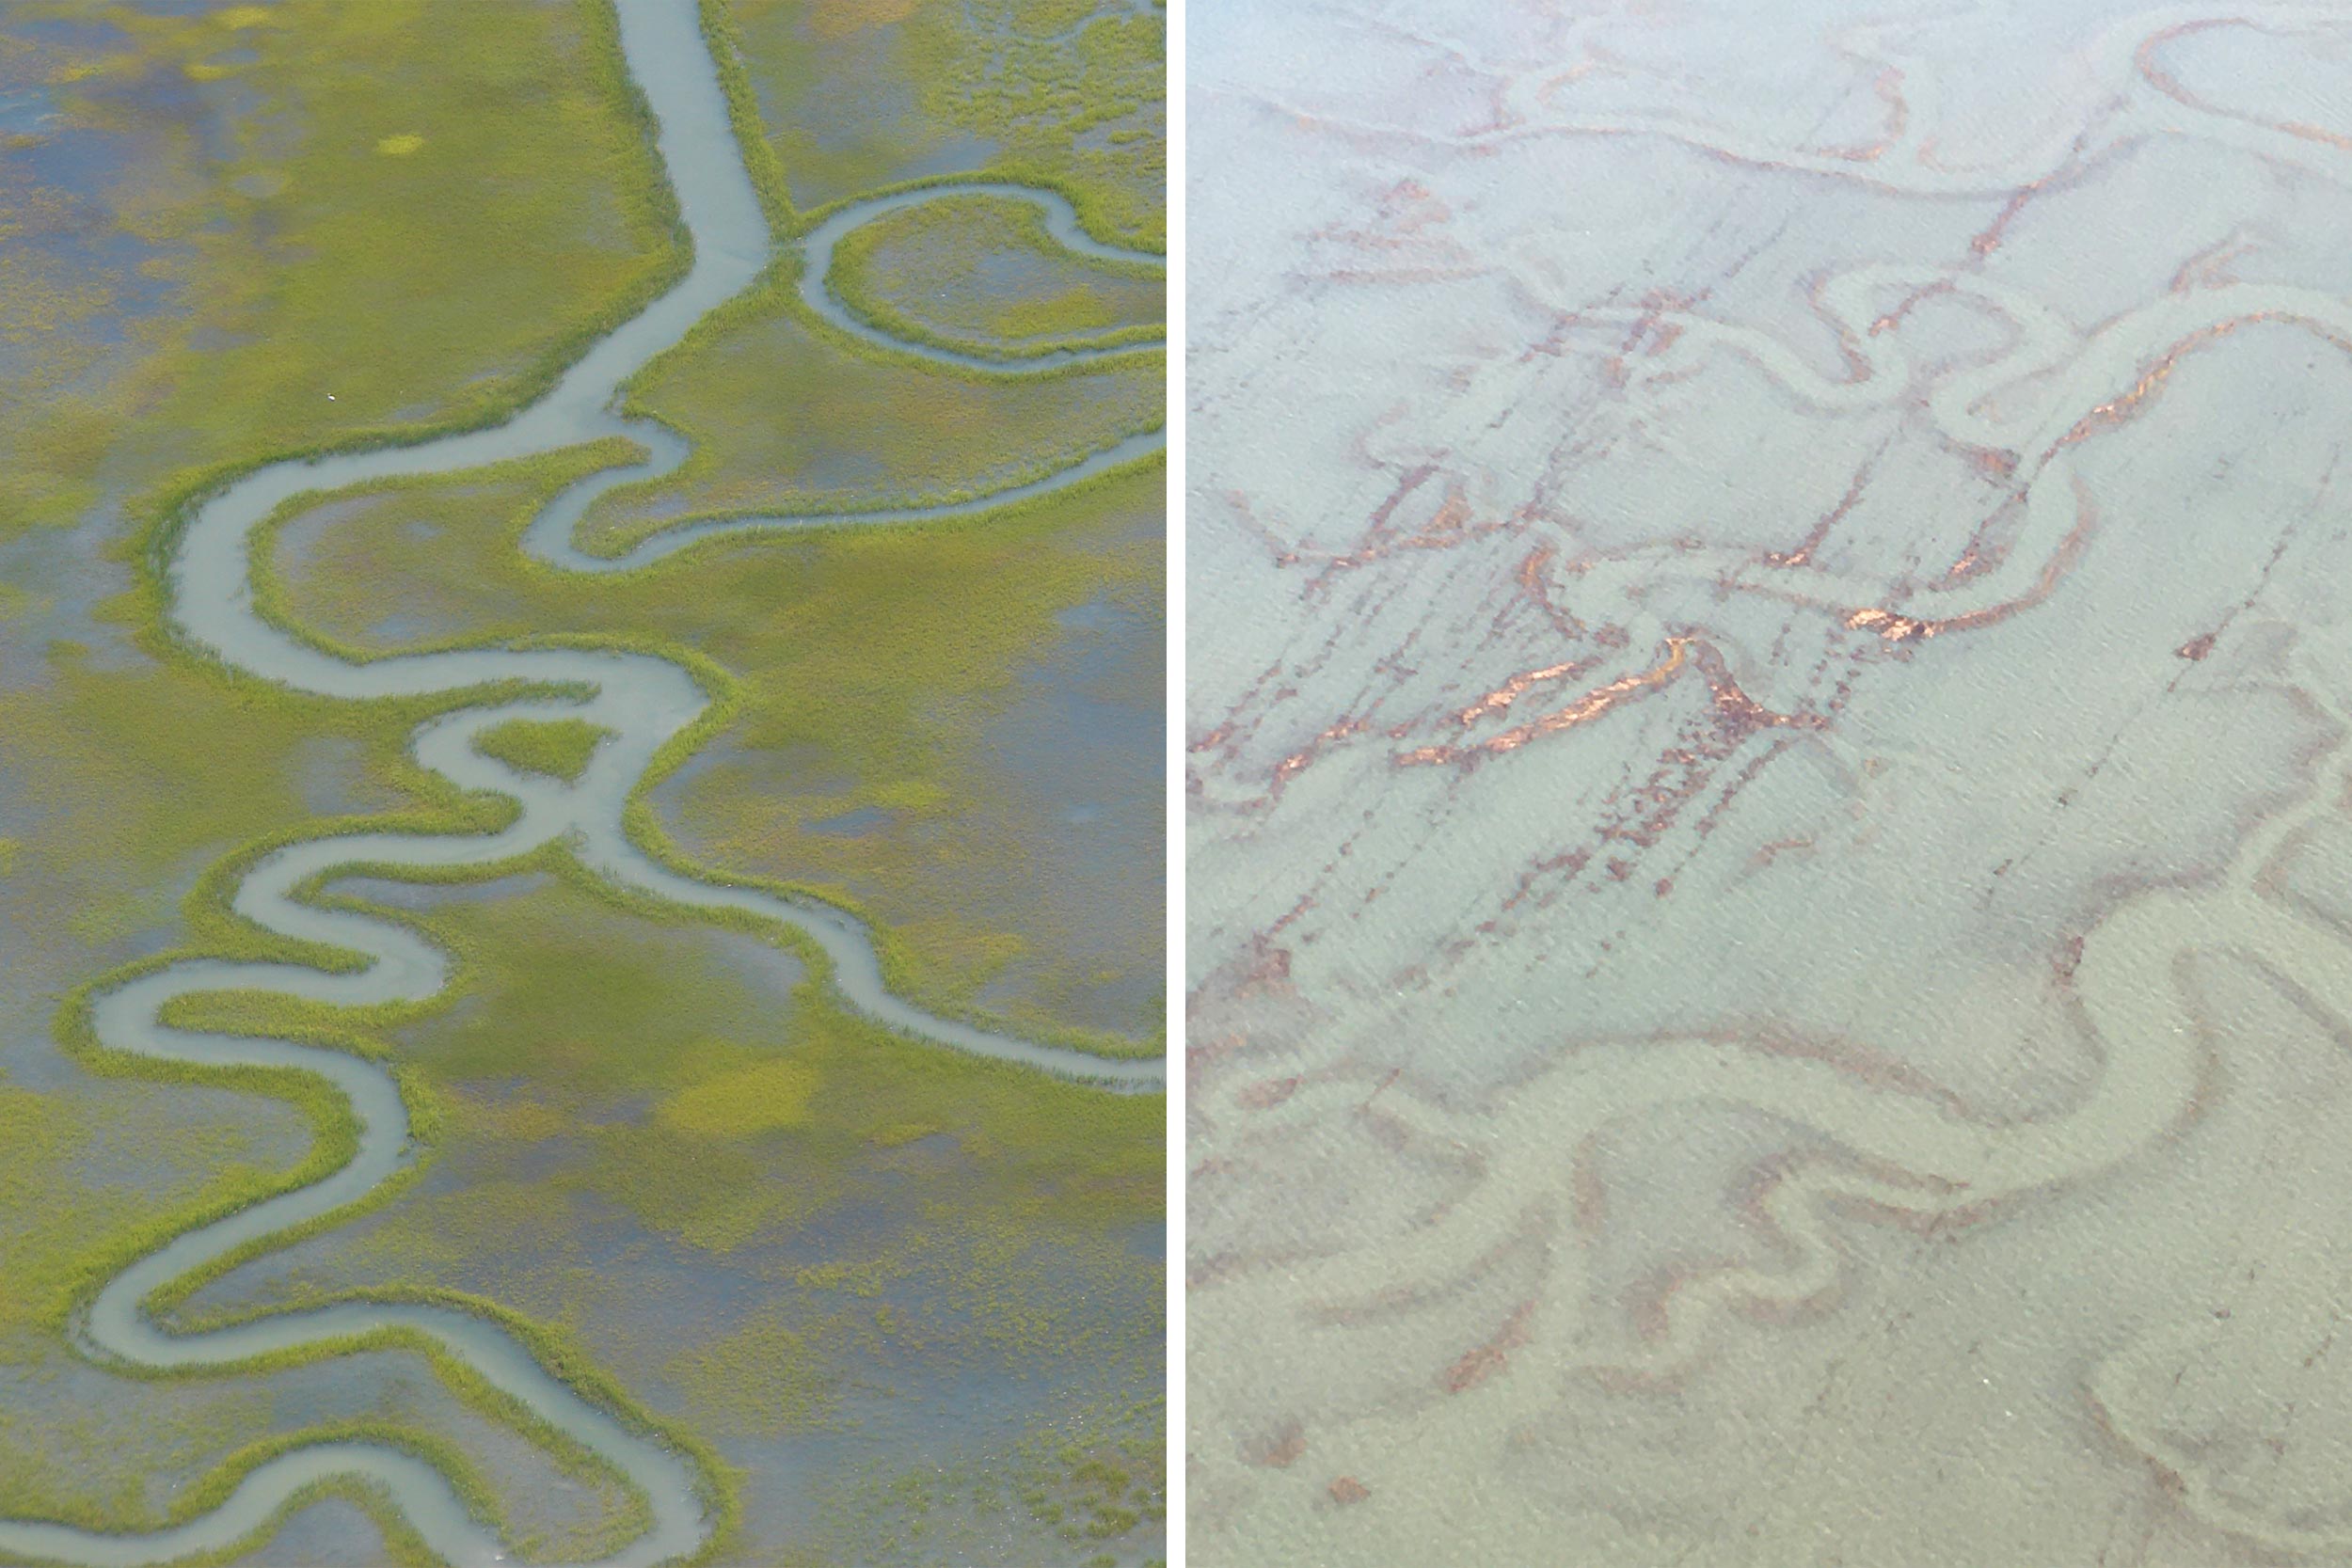 Left is a marsh at normal high tide.  It is green and you can see distinct outline of the river feeds; right is marsh during king tide and is grey with the outline of the river